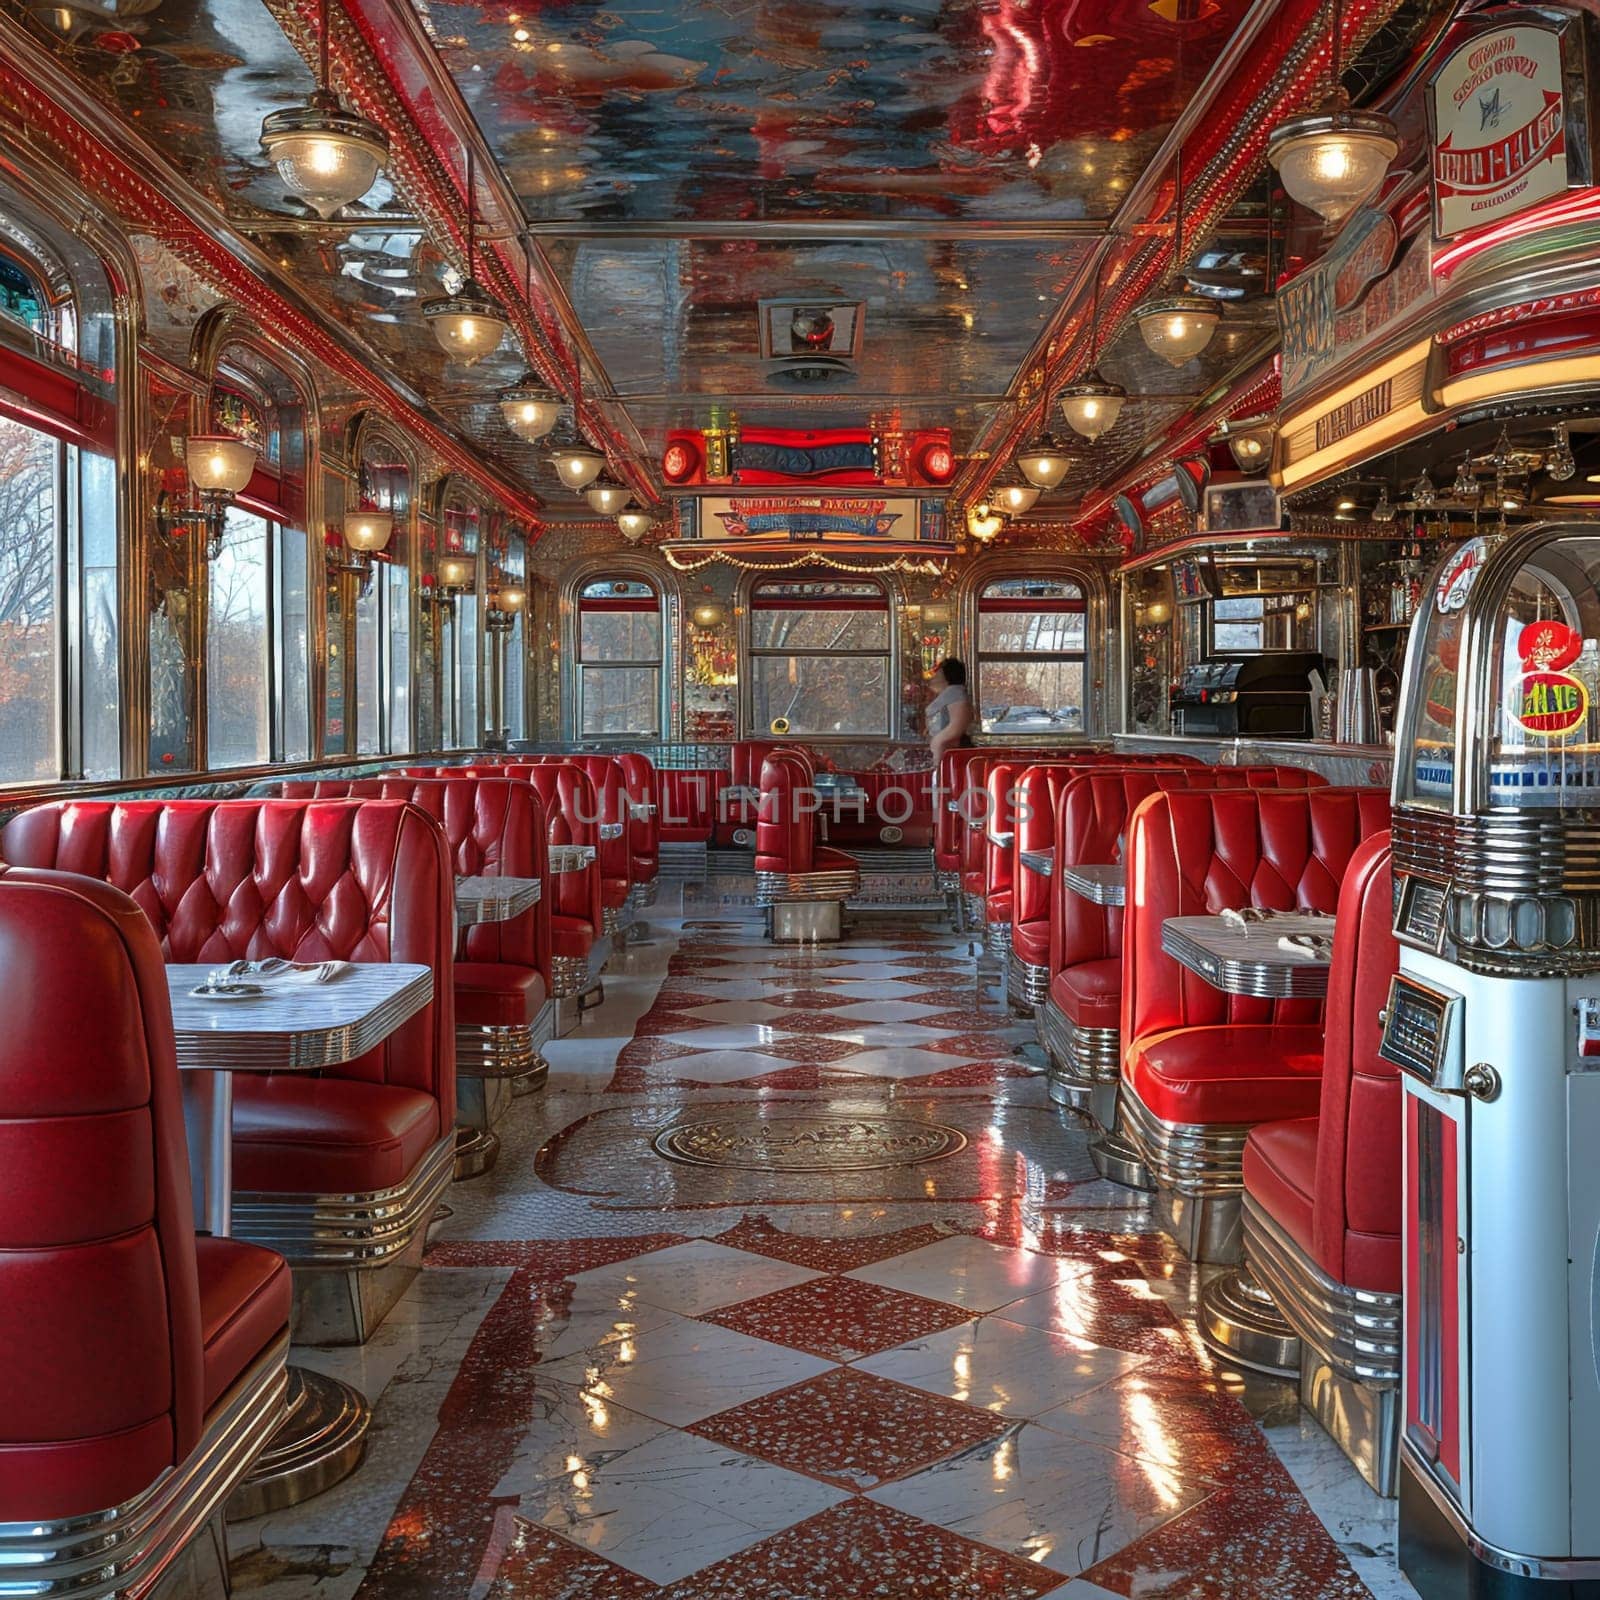 Classic American diner with red leather booths and a jukebox.